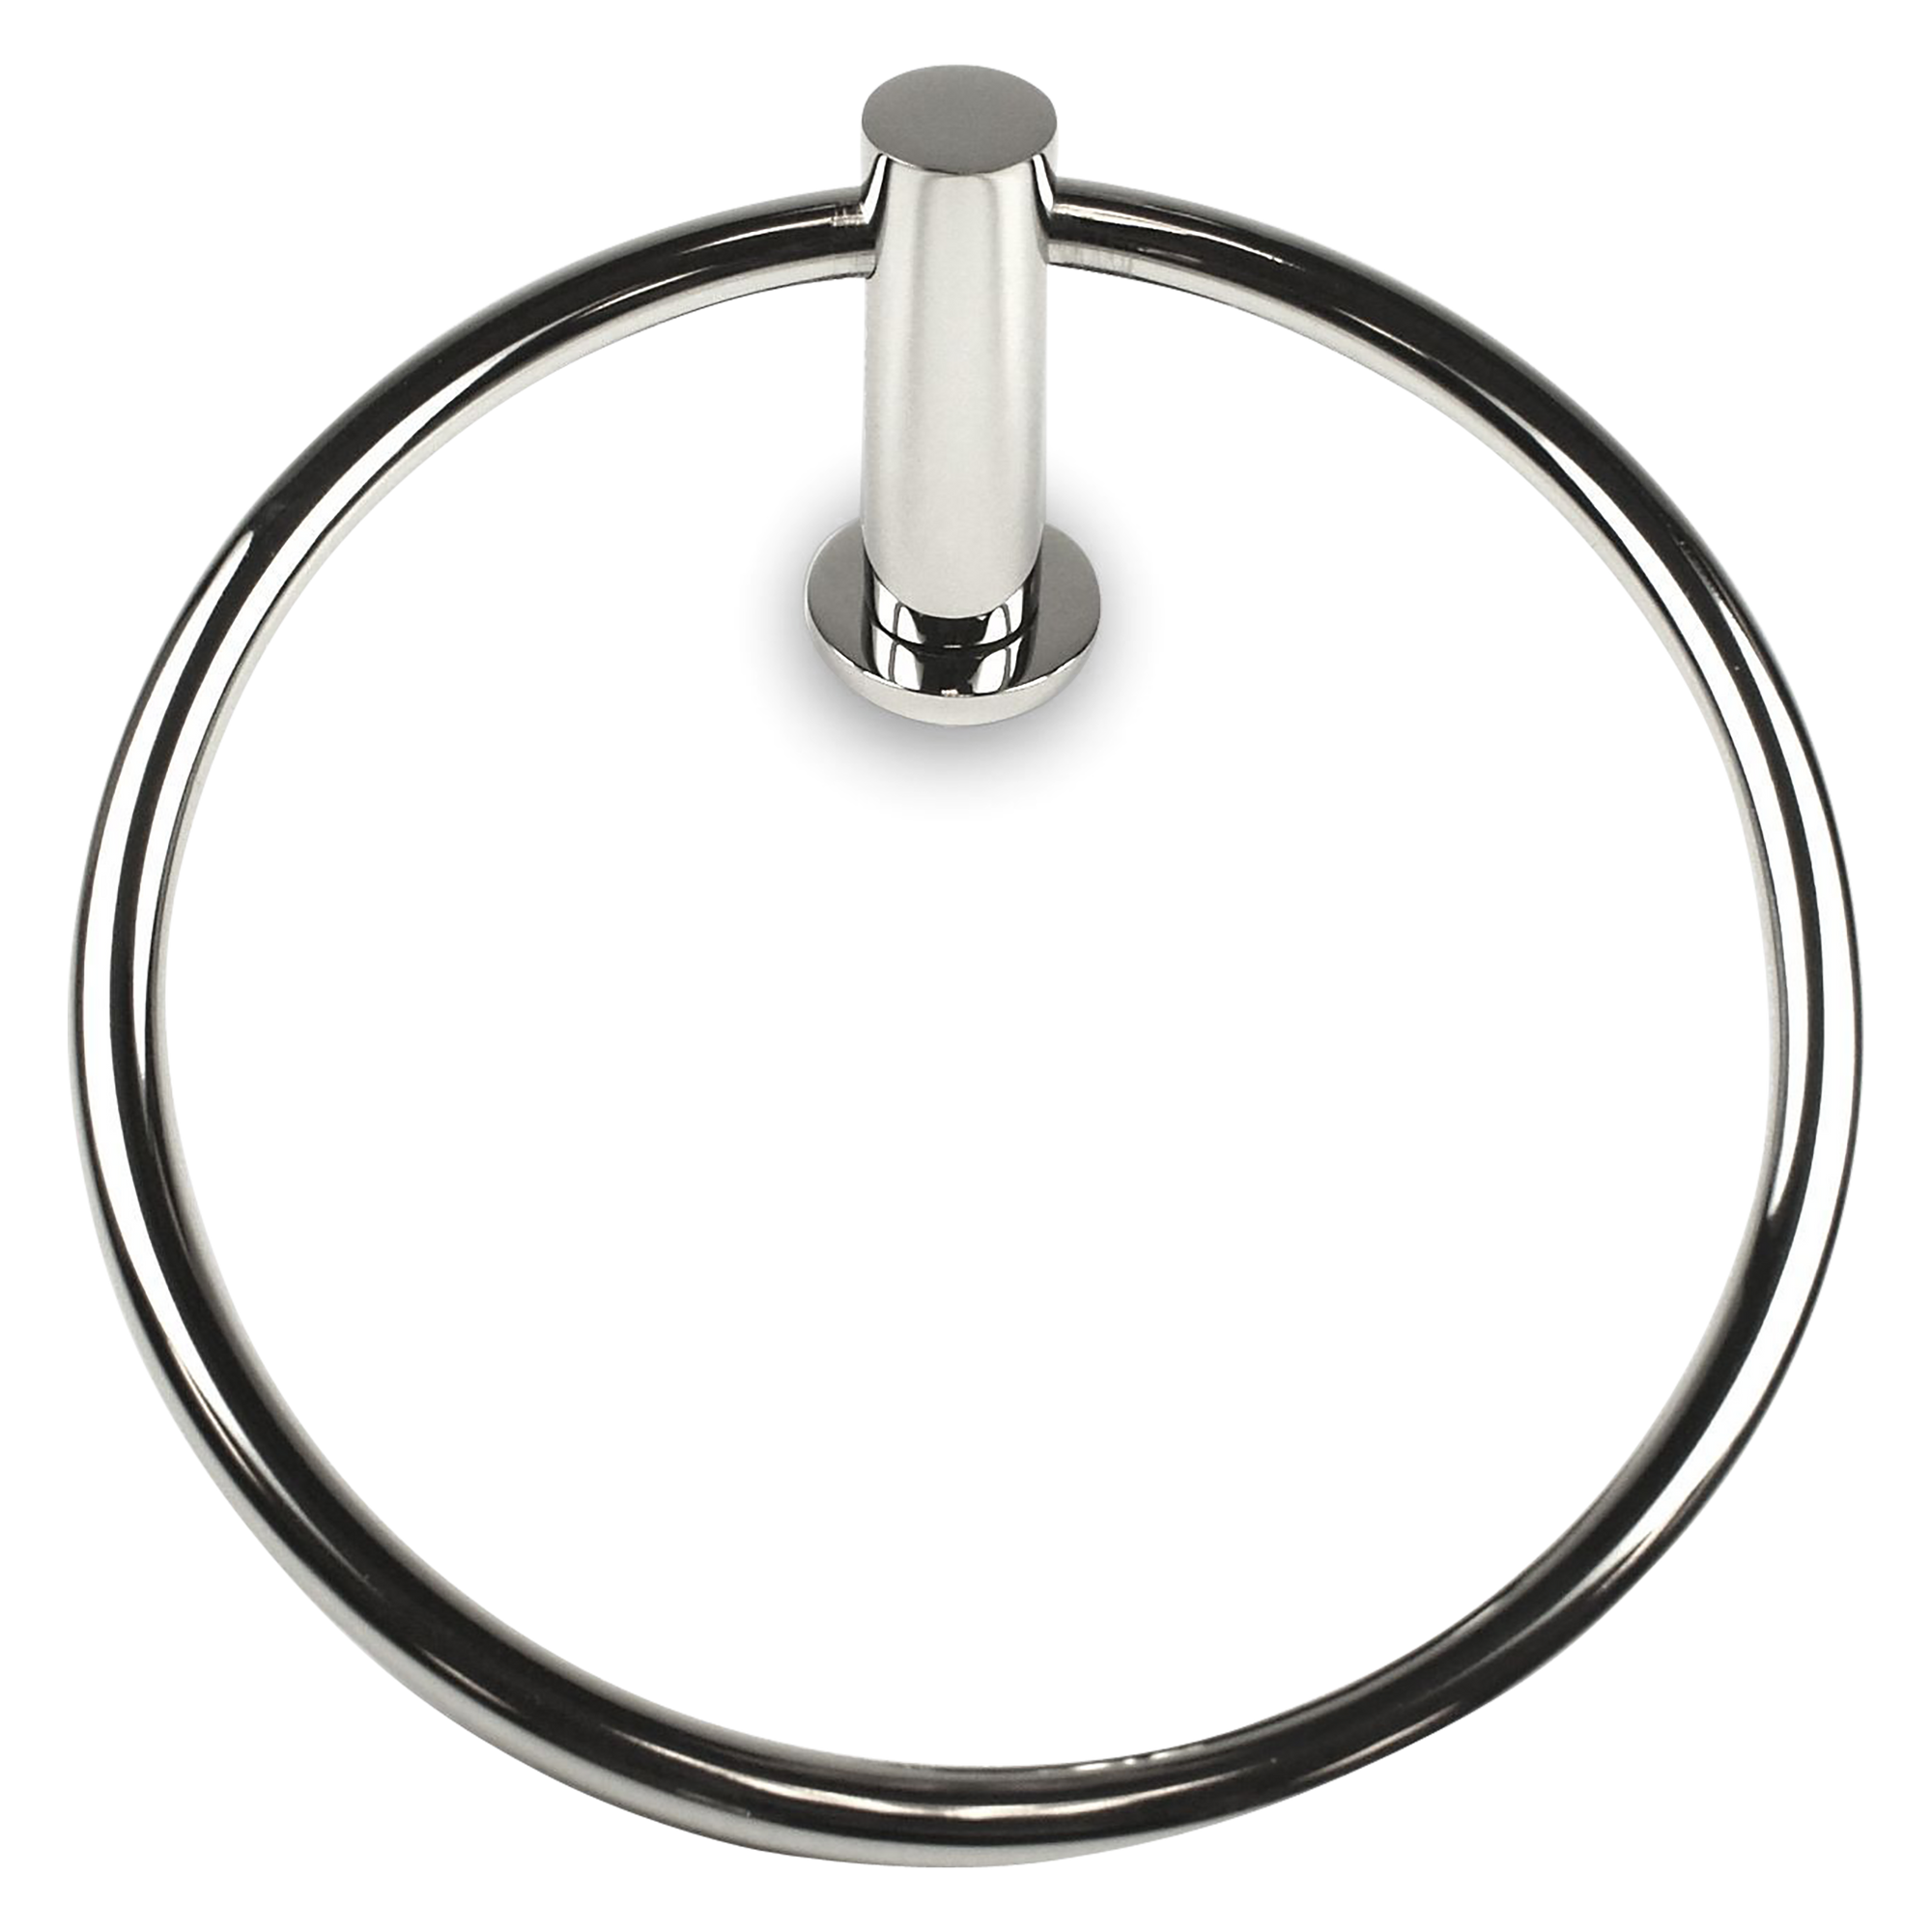 Contemporary cylindrical shaped towel ring.